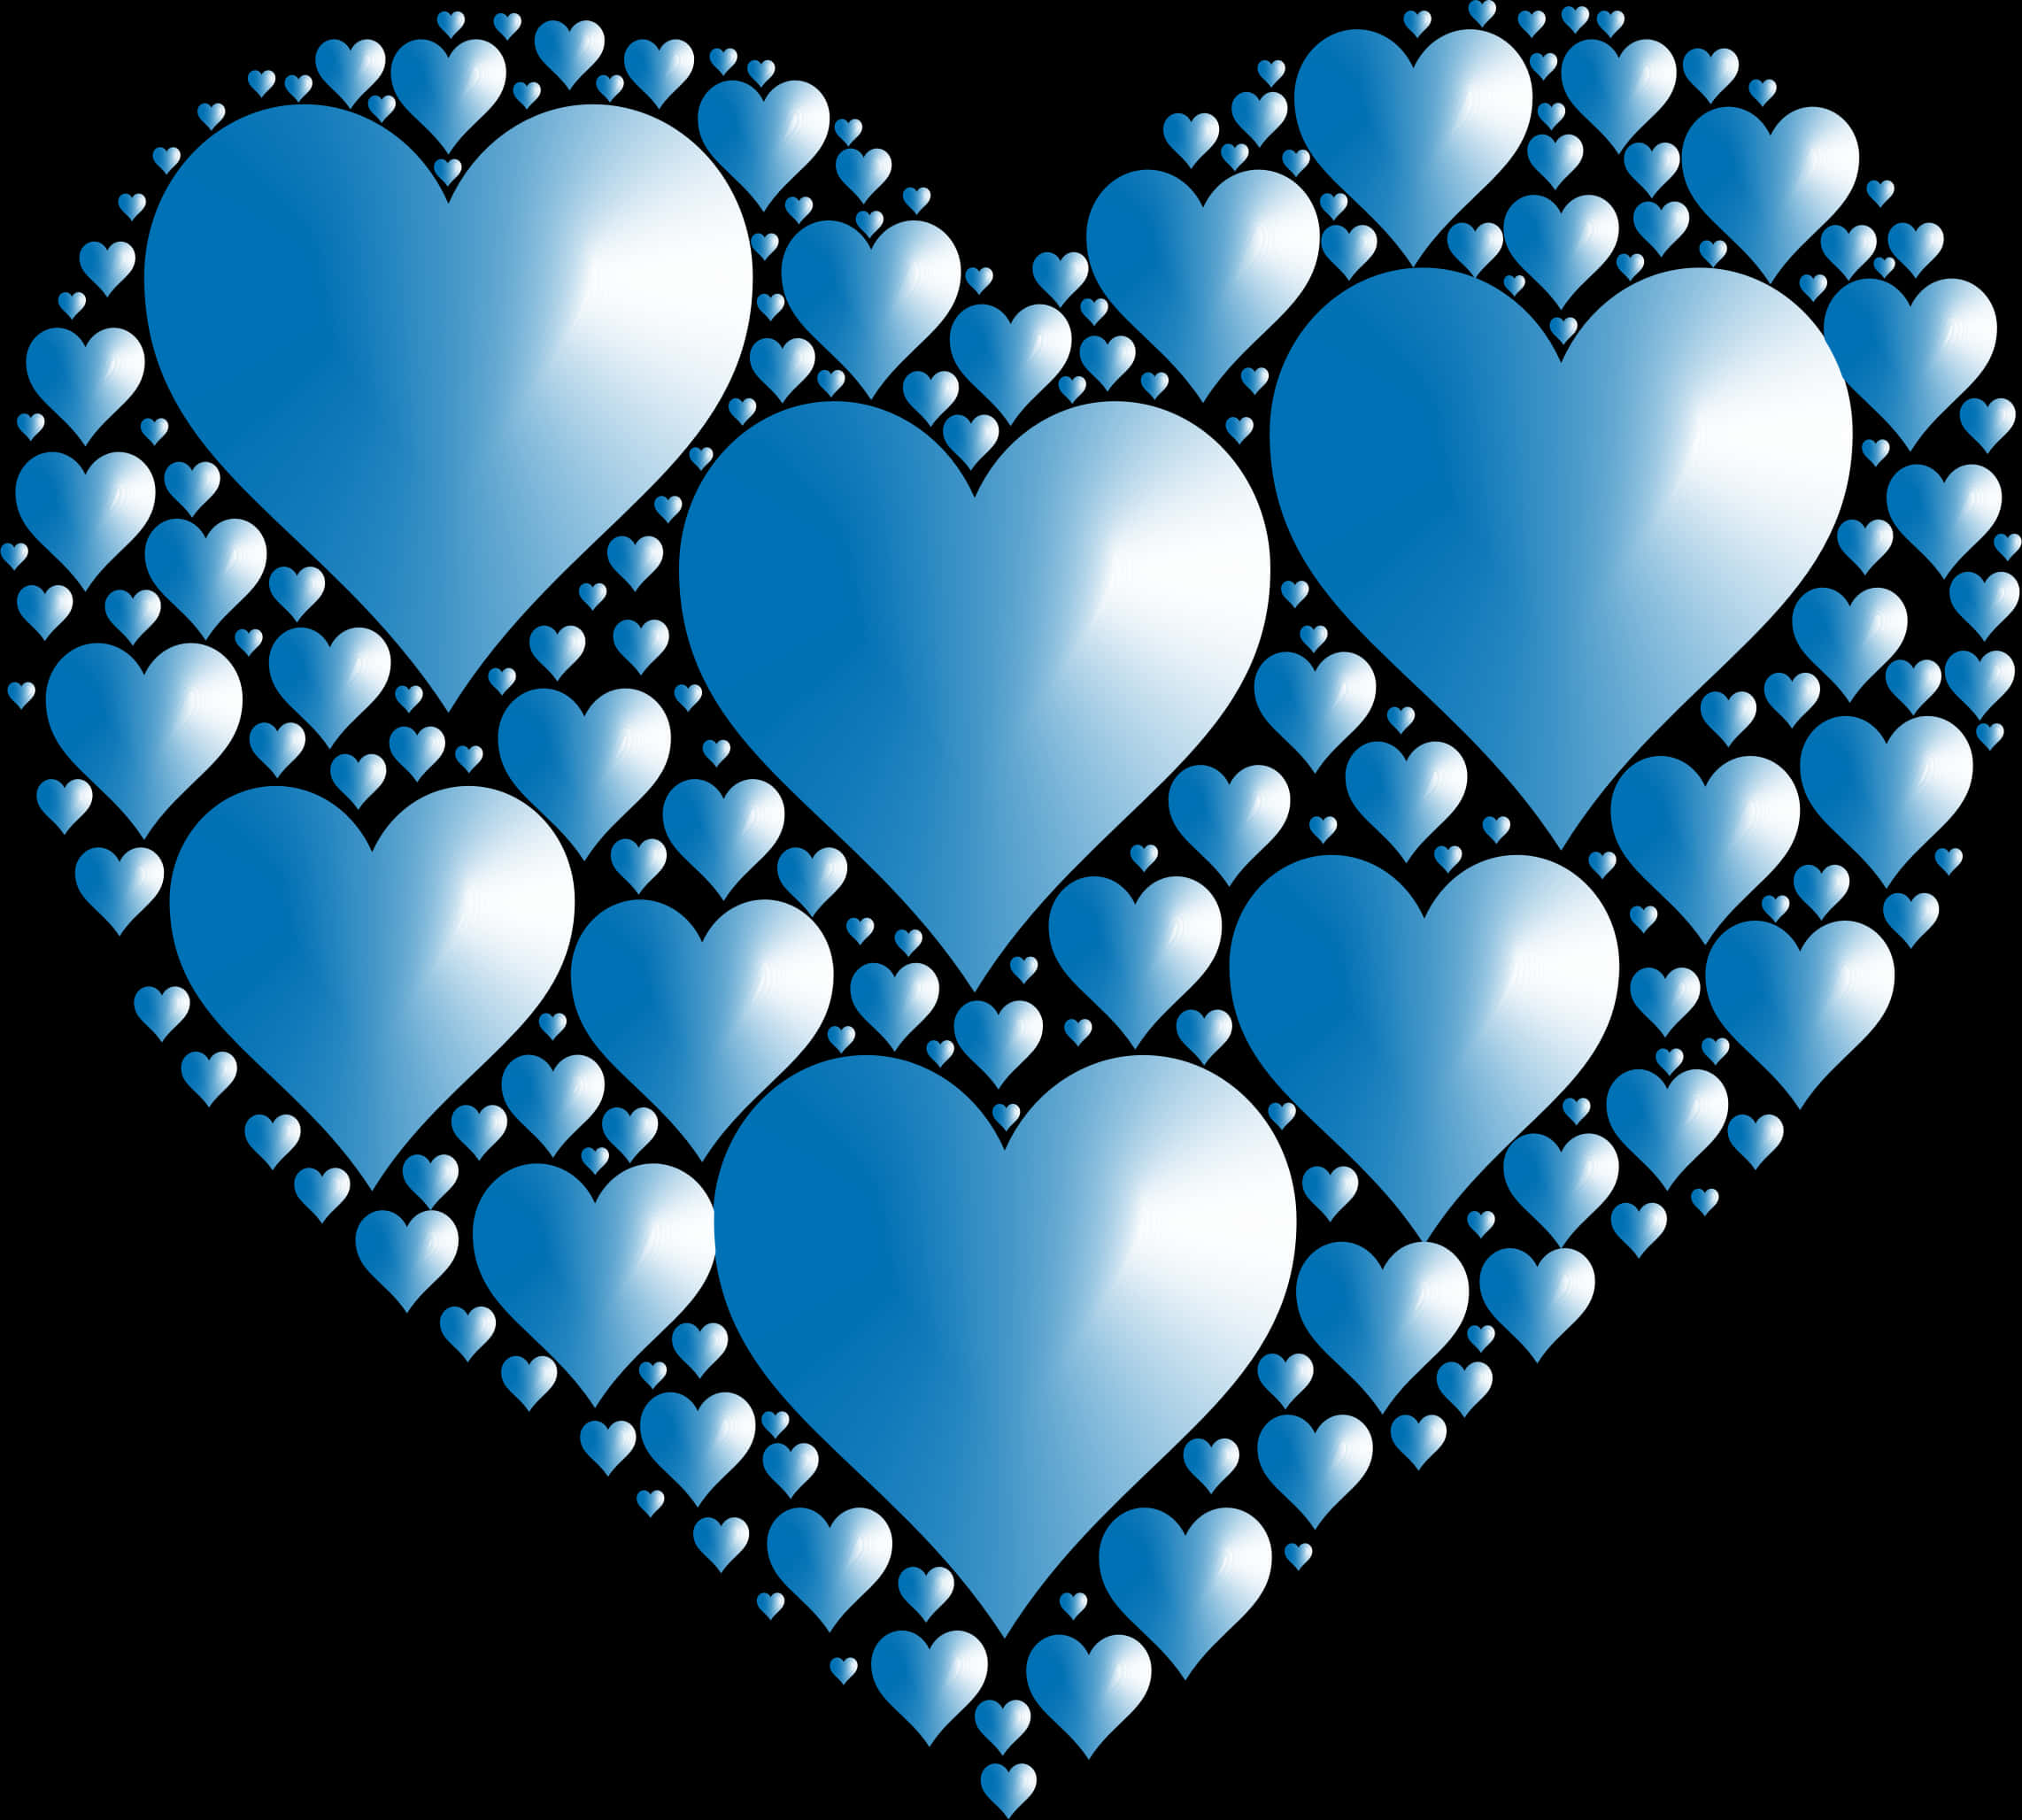 Blue Hearts Collage PNG image